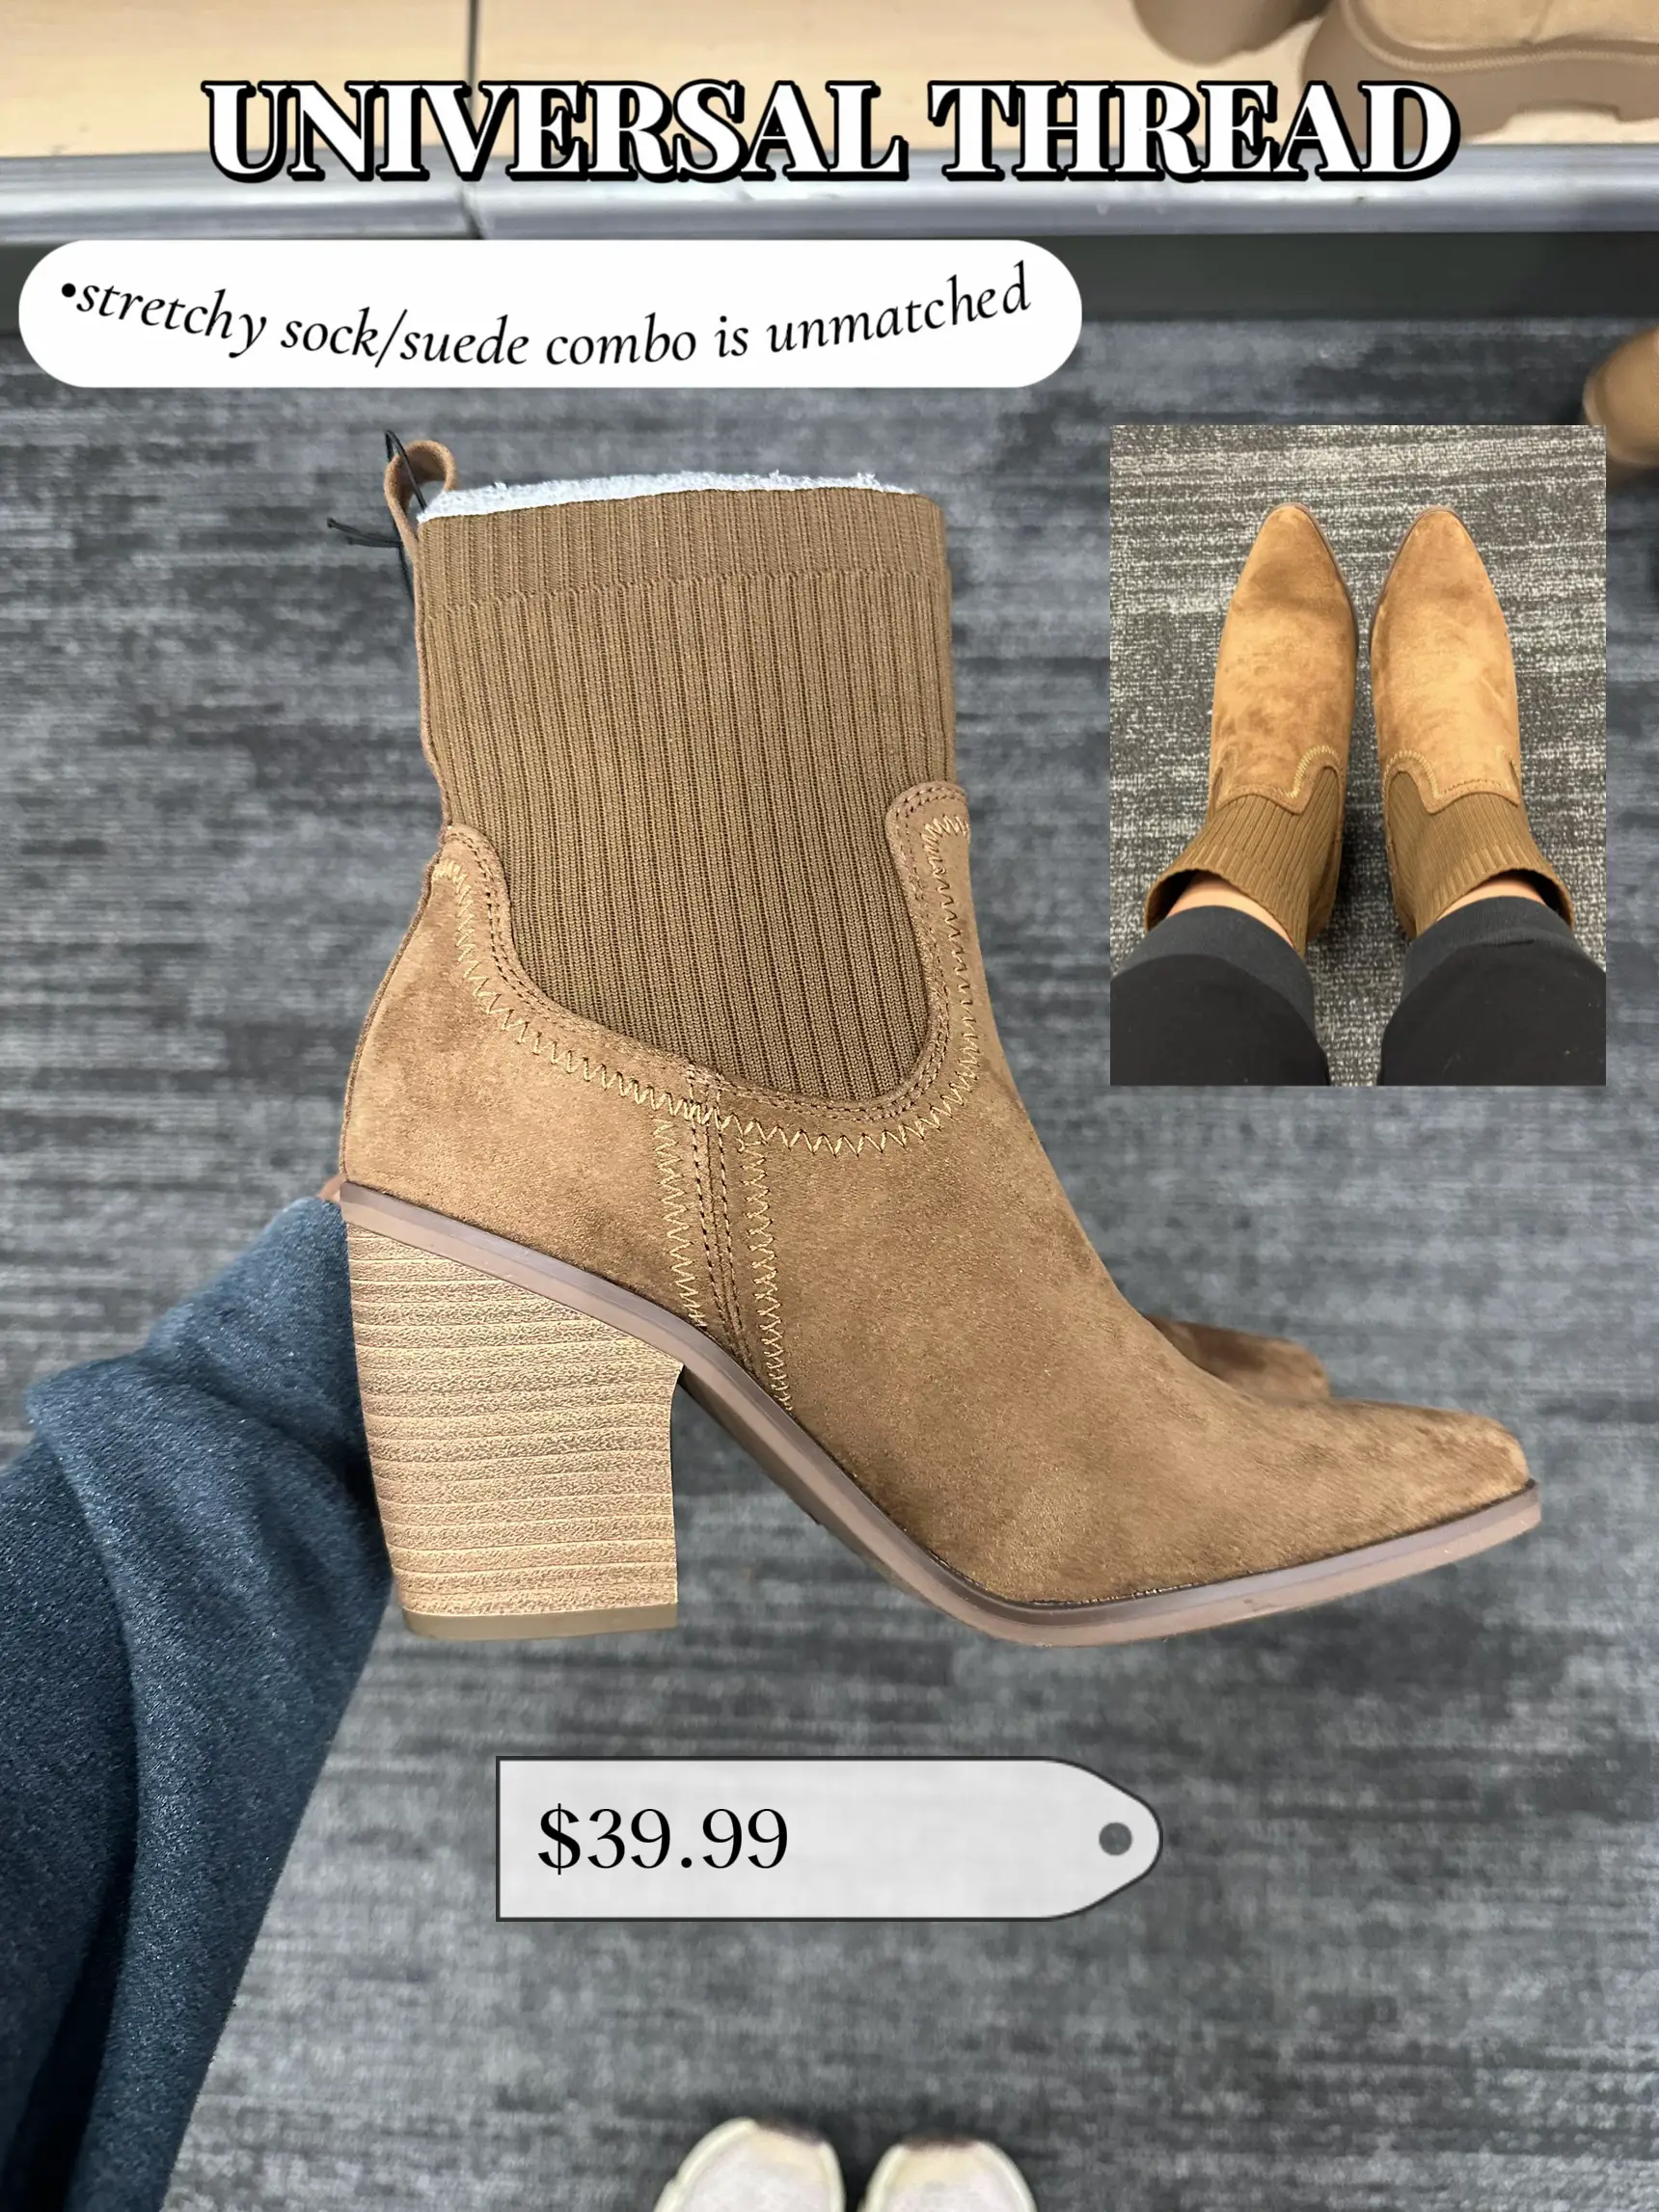  A pair of brown boots with a price of $39.99.